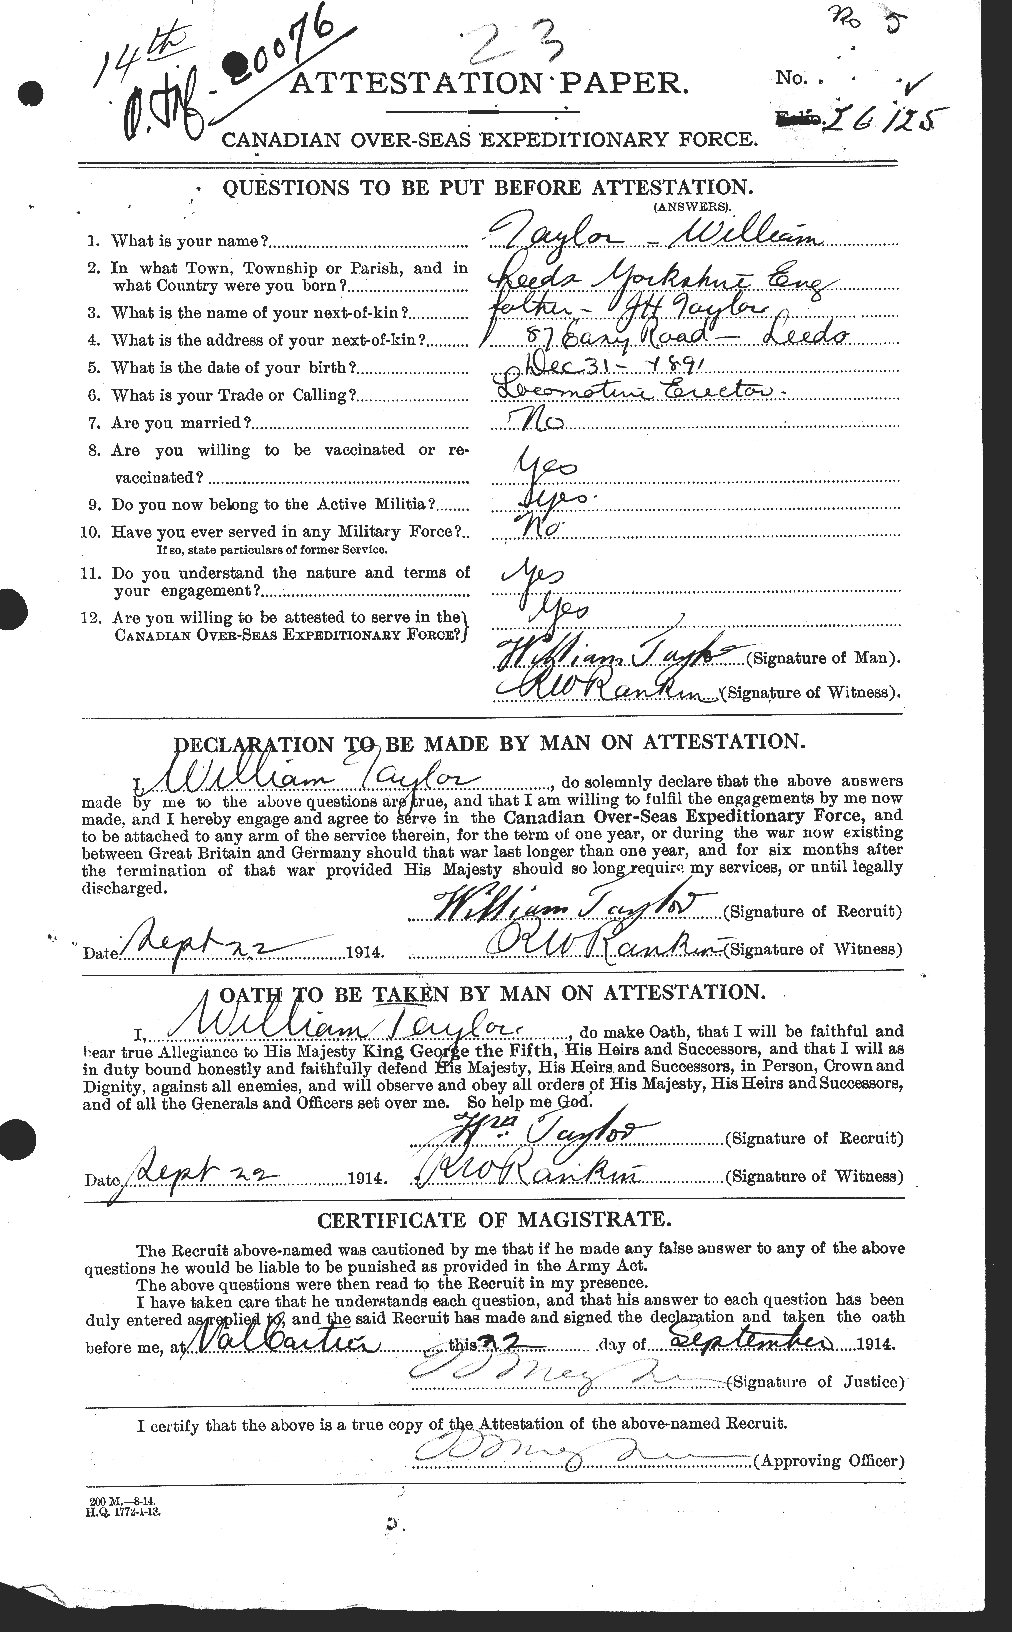 Personnel Records of the First World War - CEF 628144a